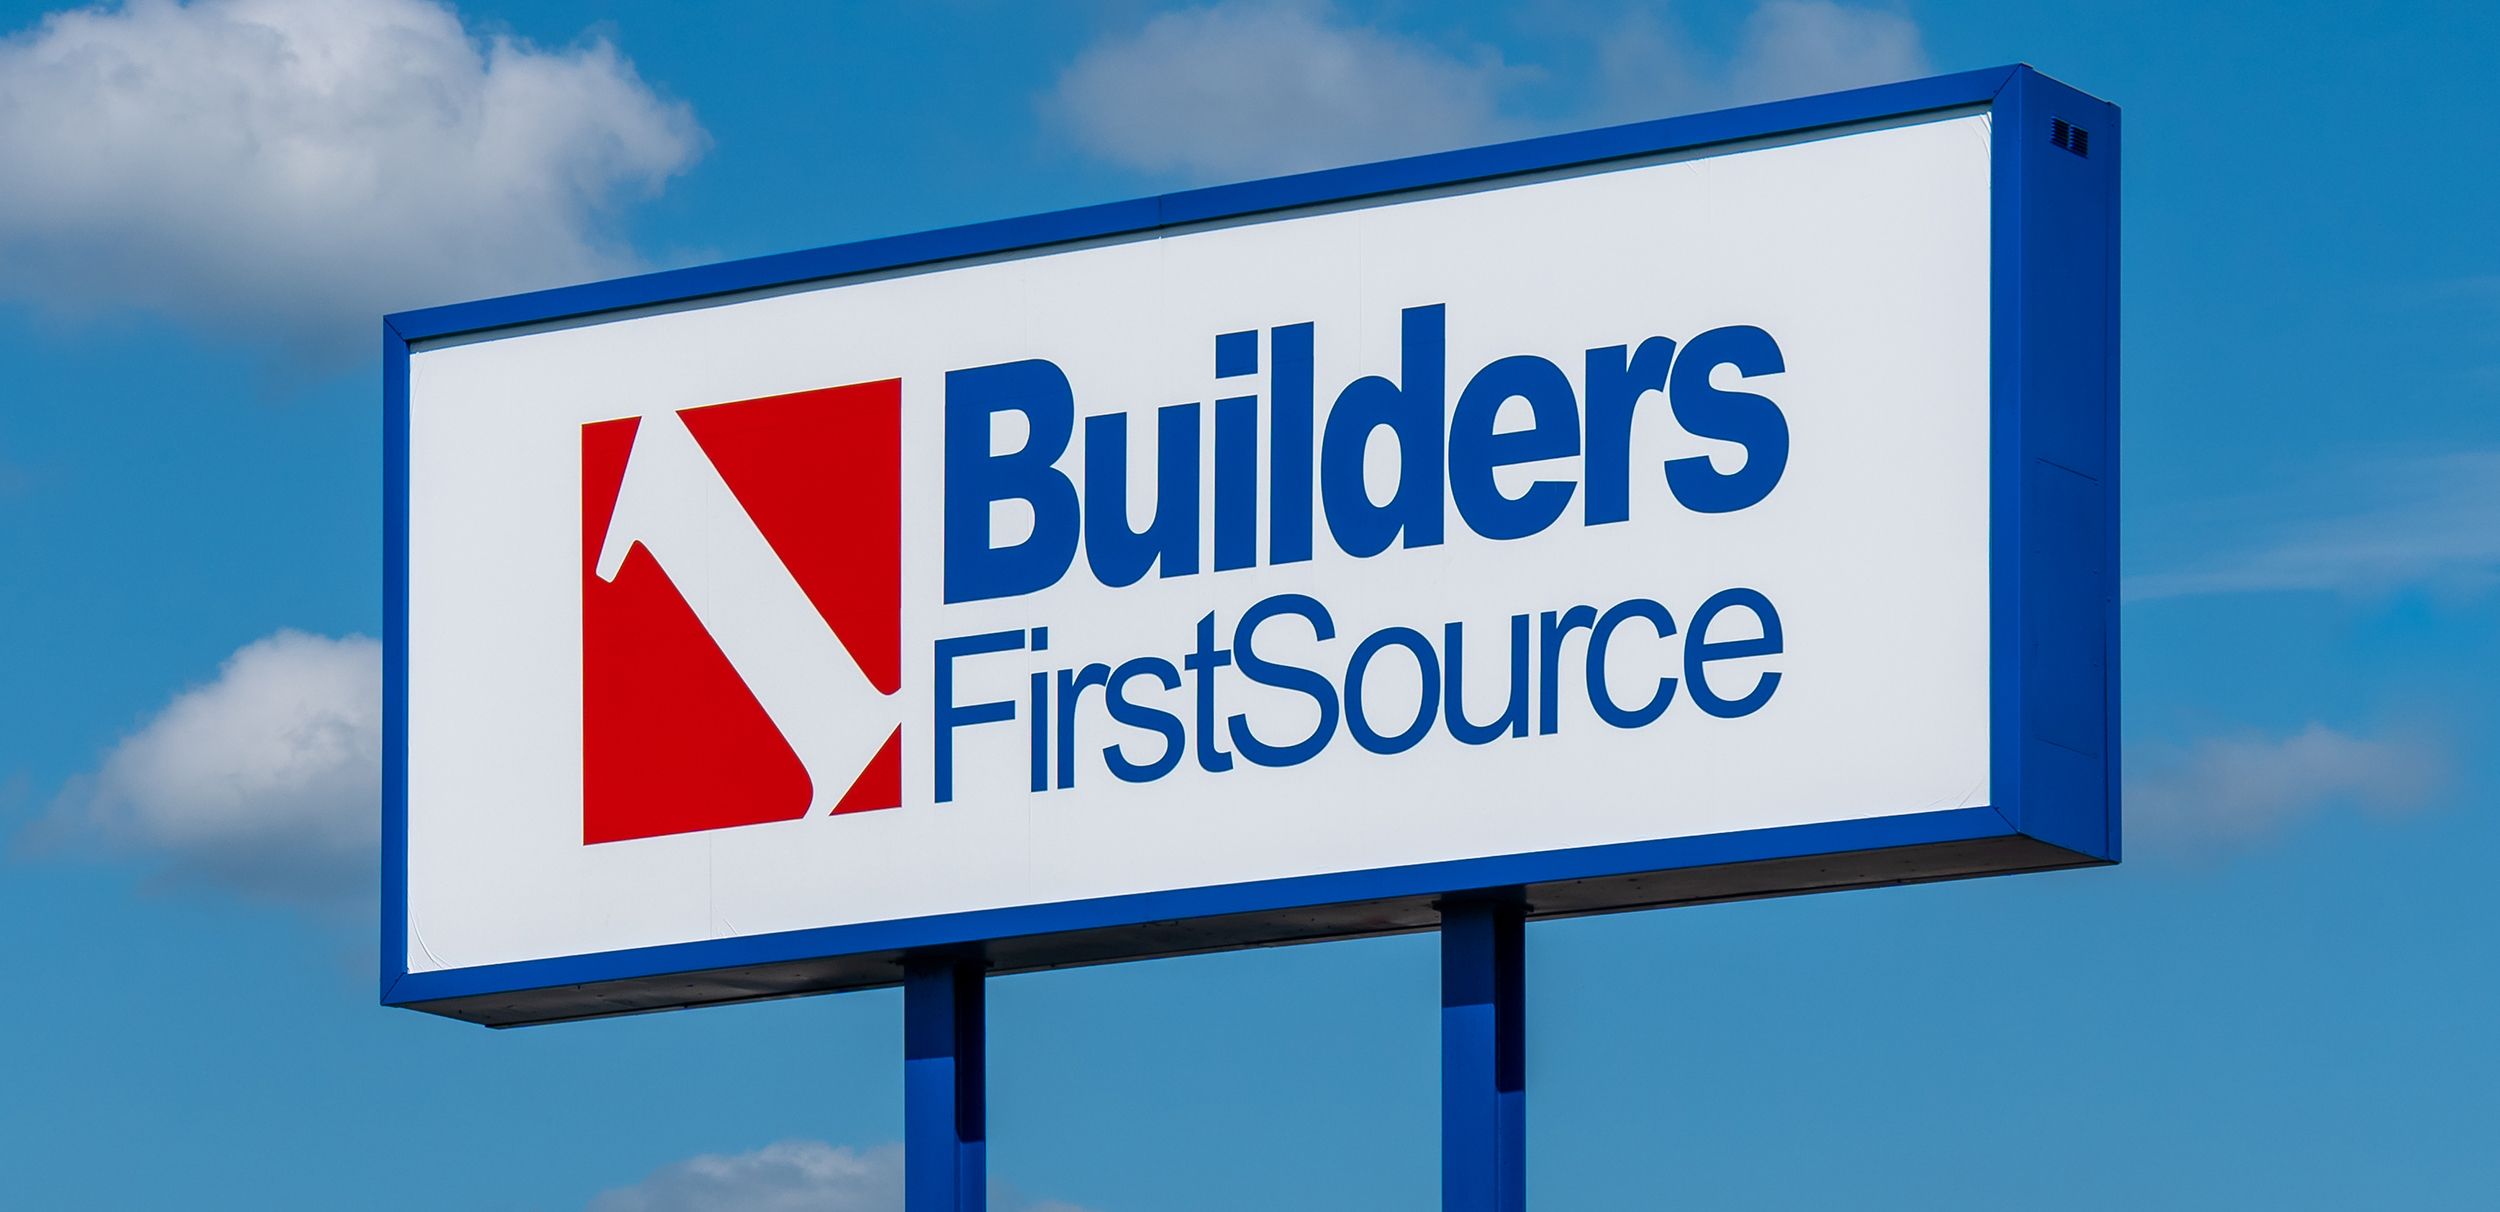 MENONINEE, WI/USA - AUGUST 17, 2019: Builders FirstSource exterior and trademark logo.